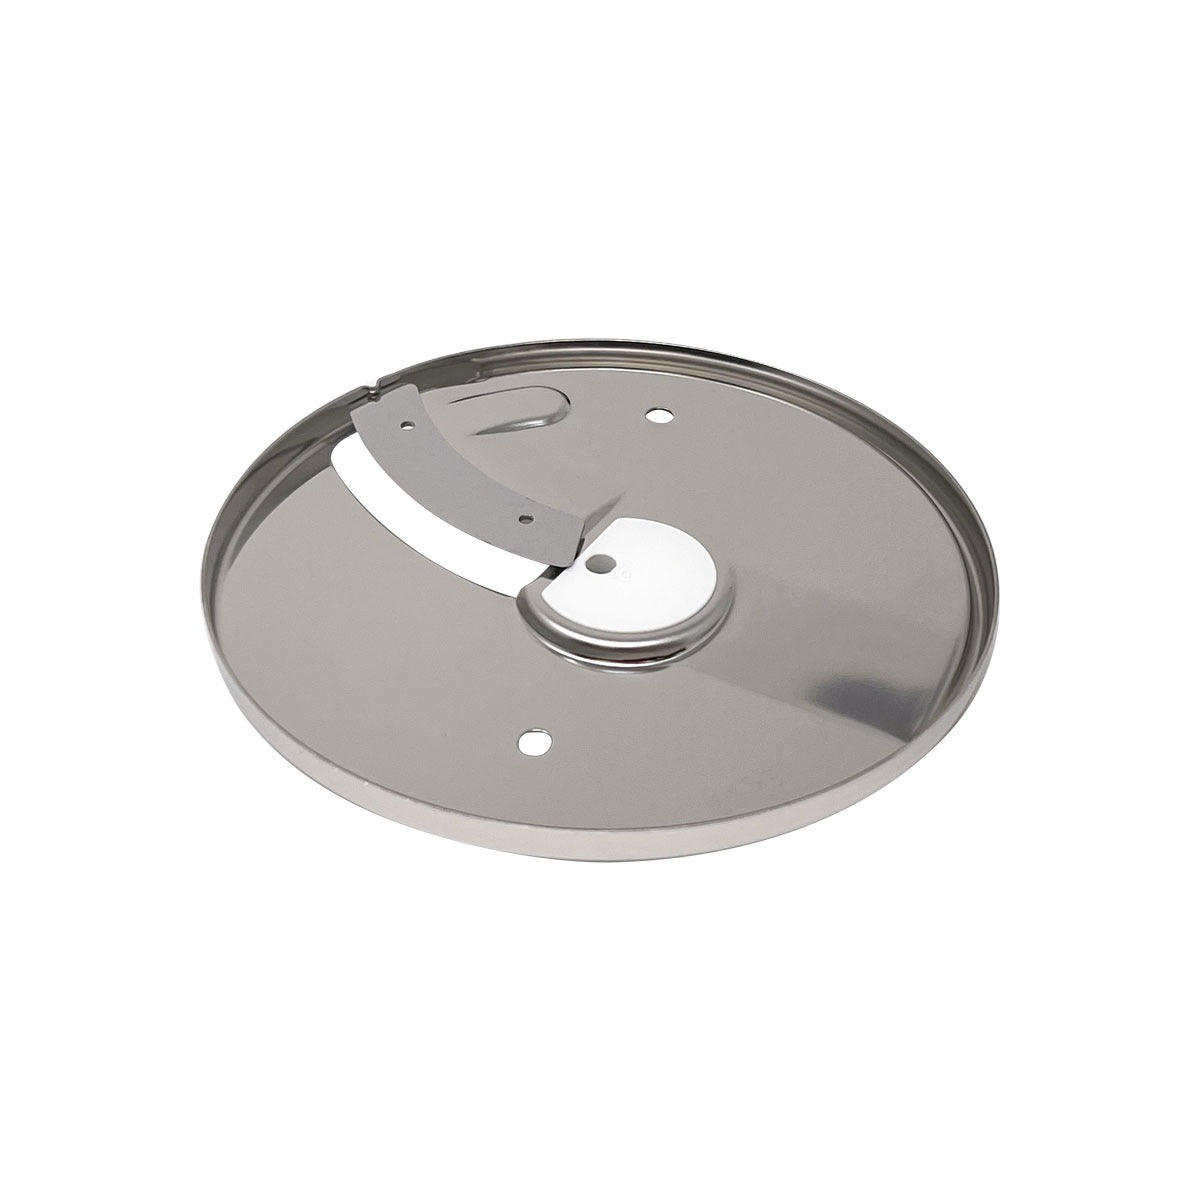 Magimix Specialty Disk - 6mm Slicing Disk